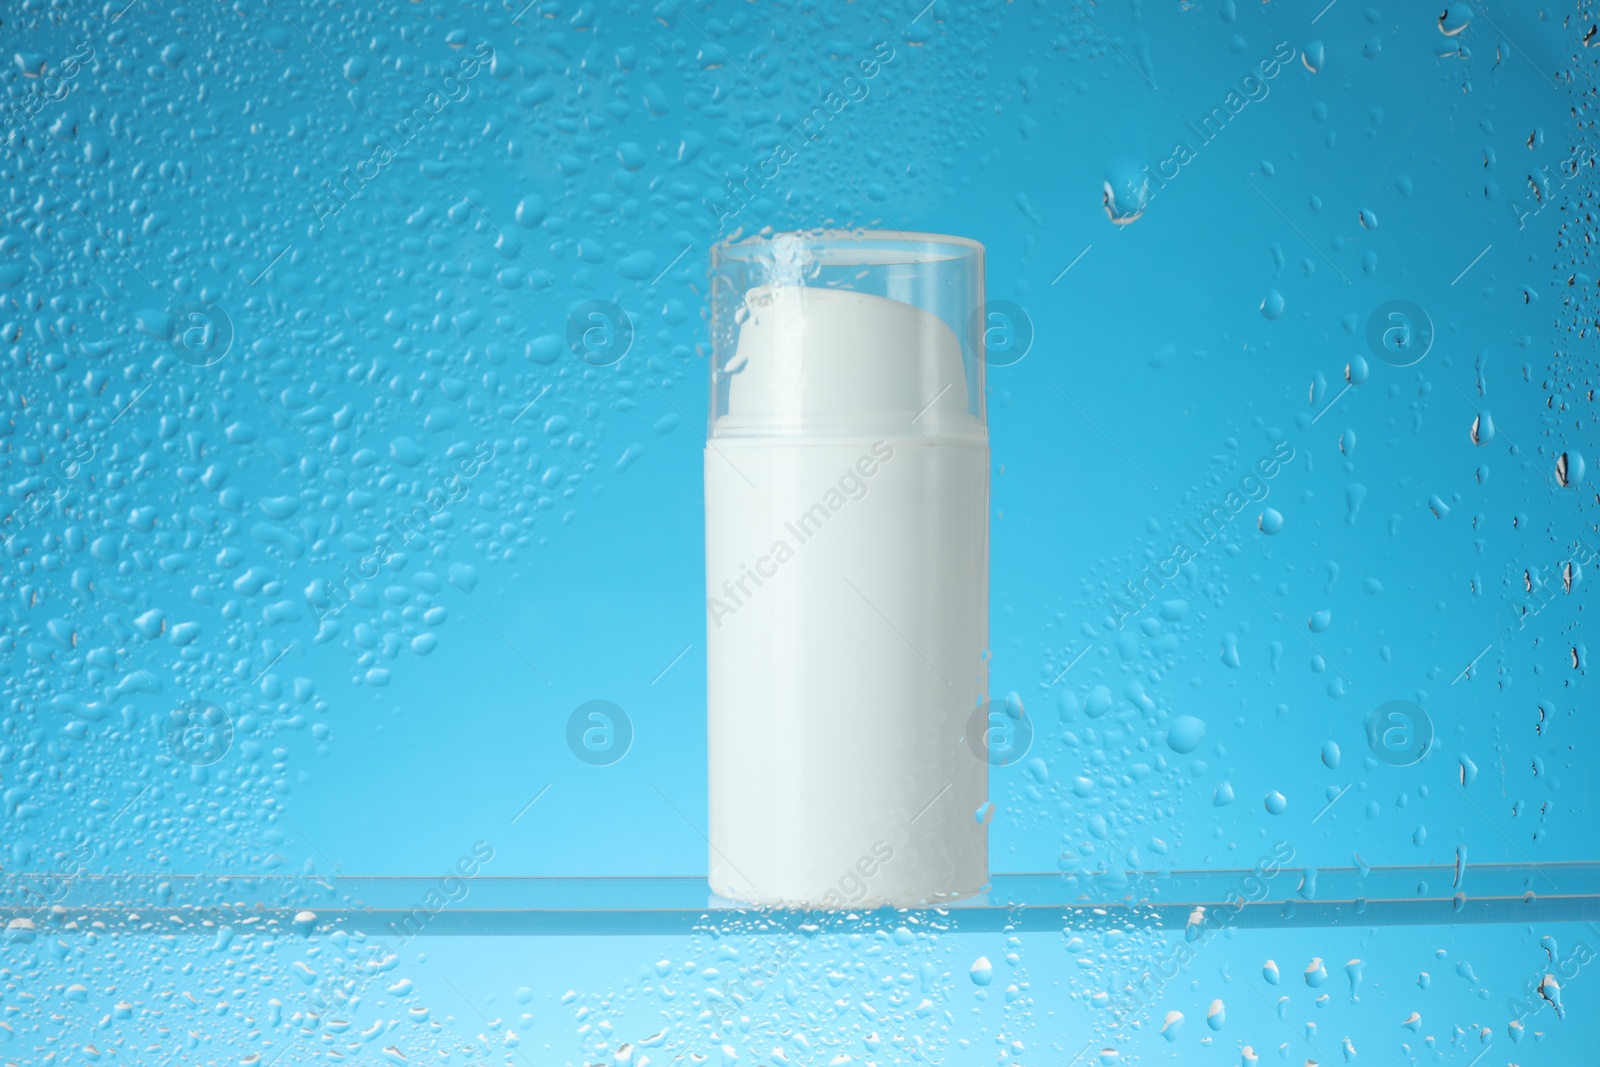 Photo of Bottle with moisturizing cream on light blue background, view through wet glass